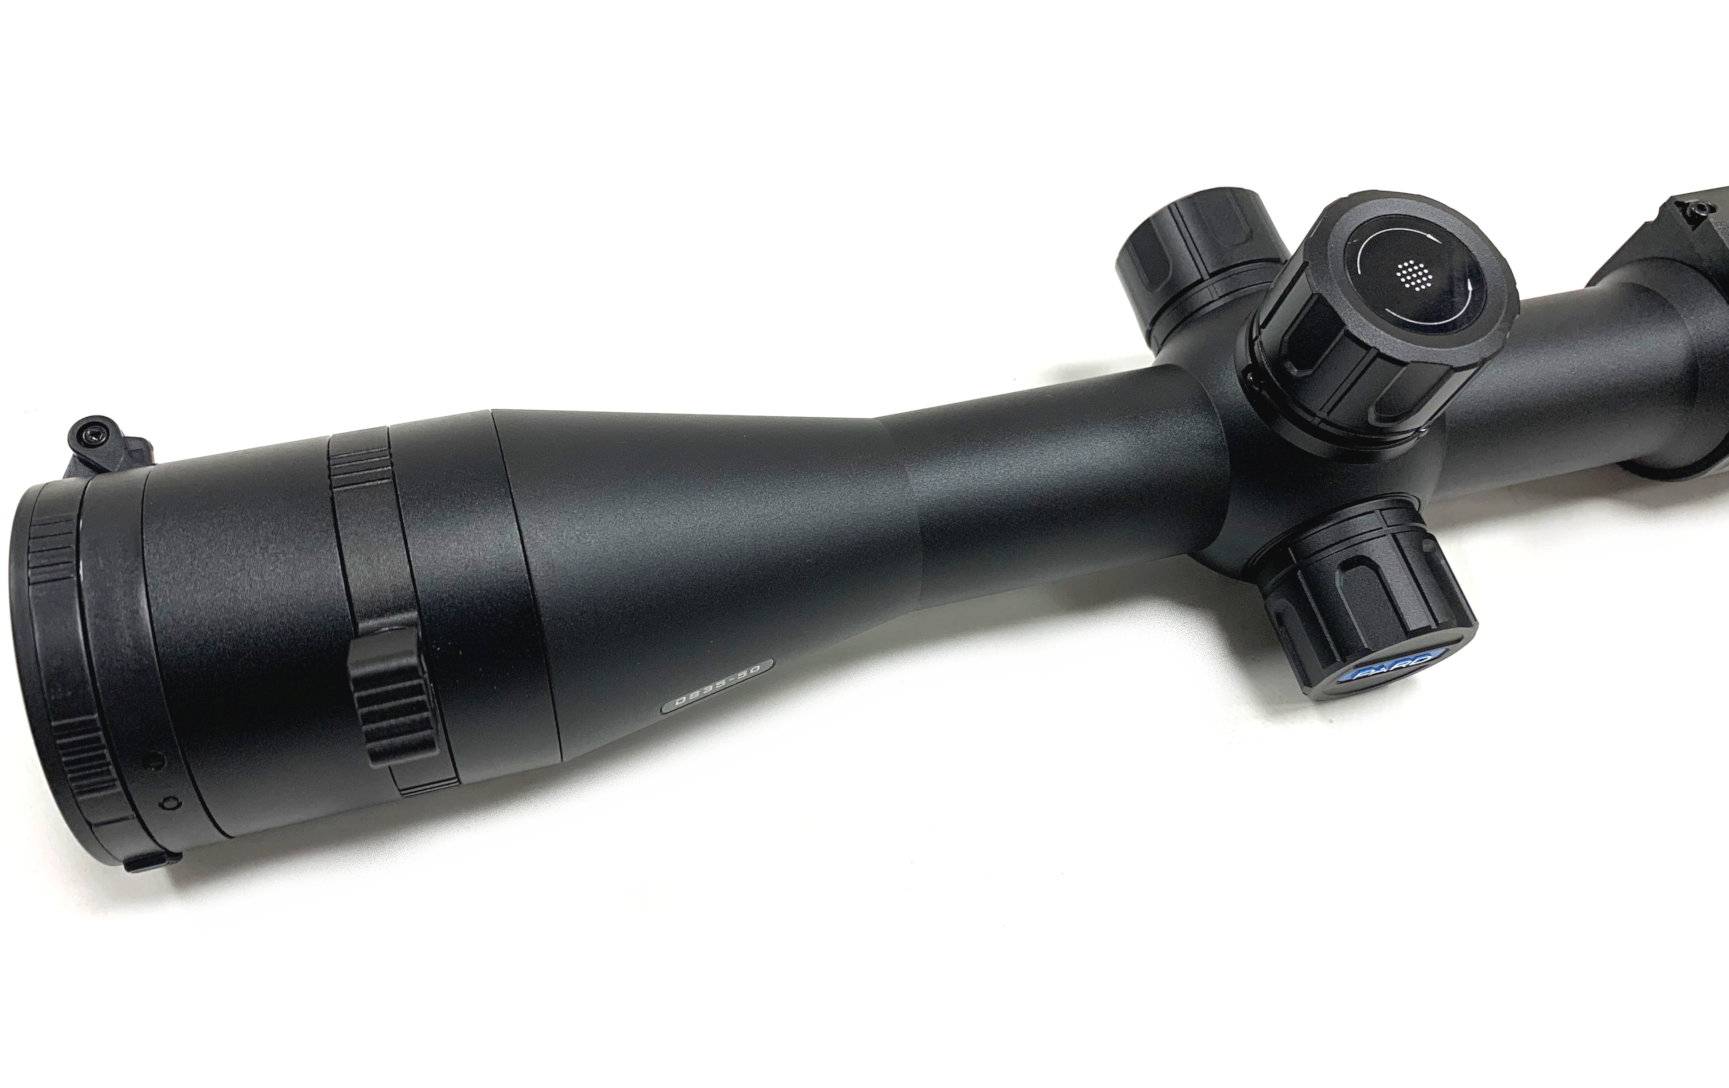 pard ds35 nightvision rifle scope